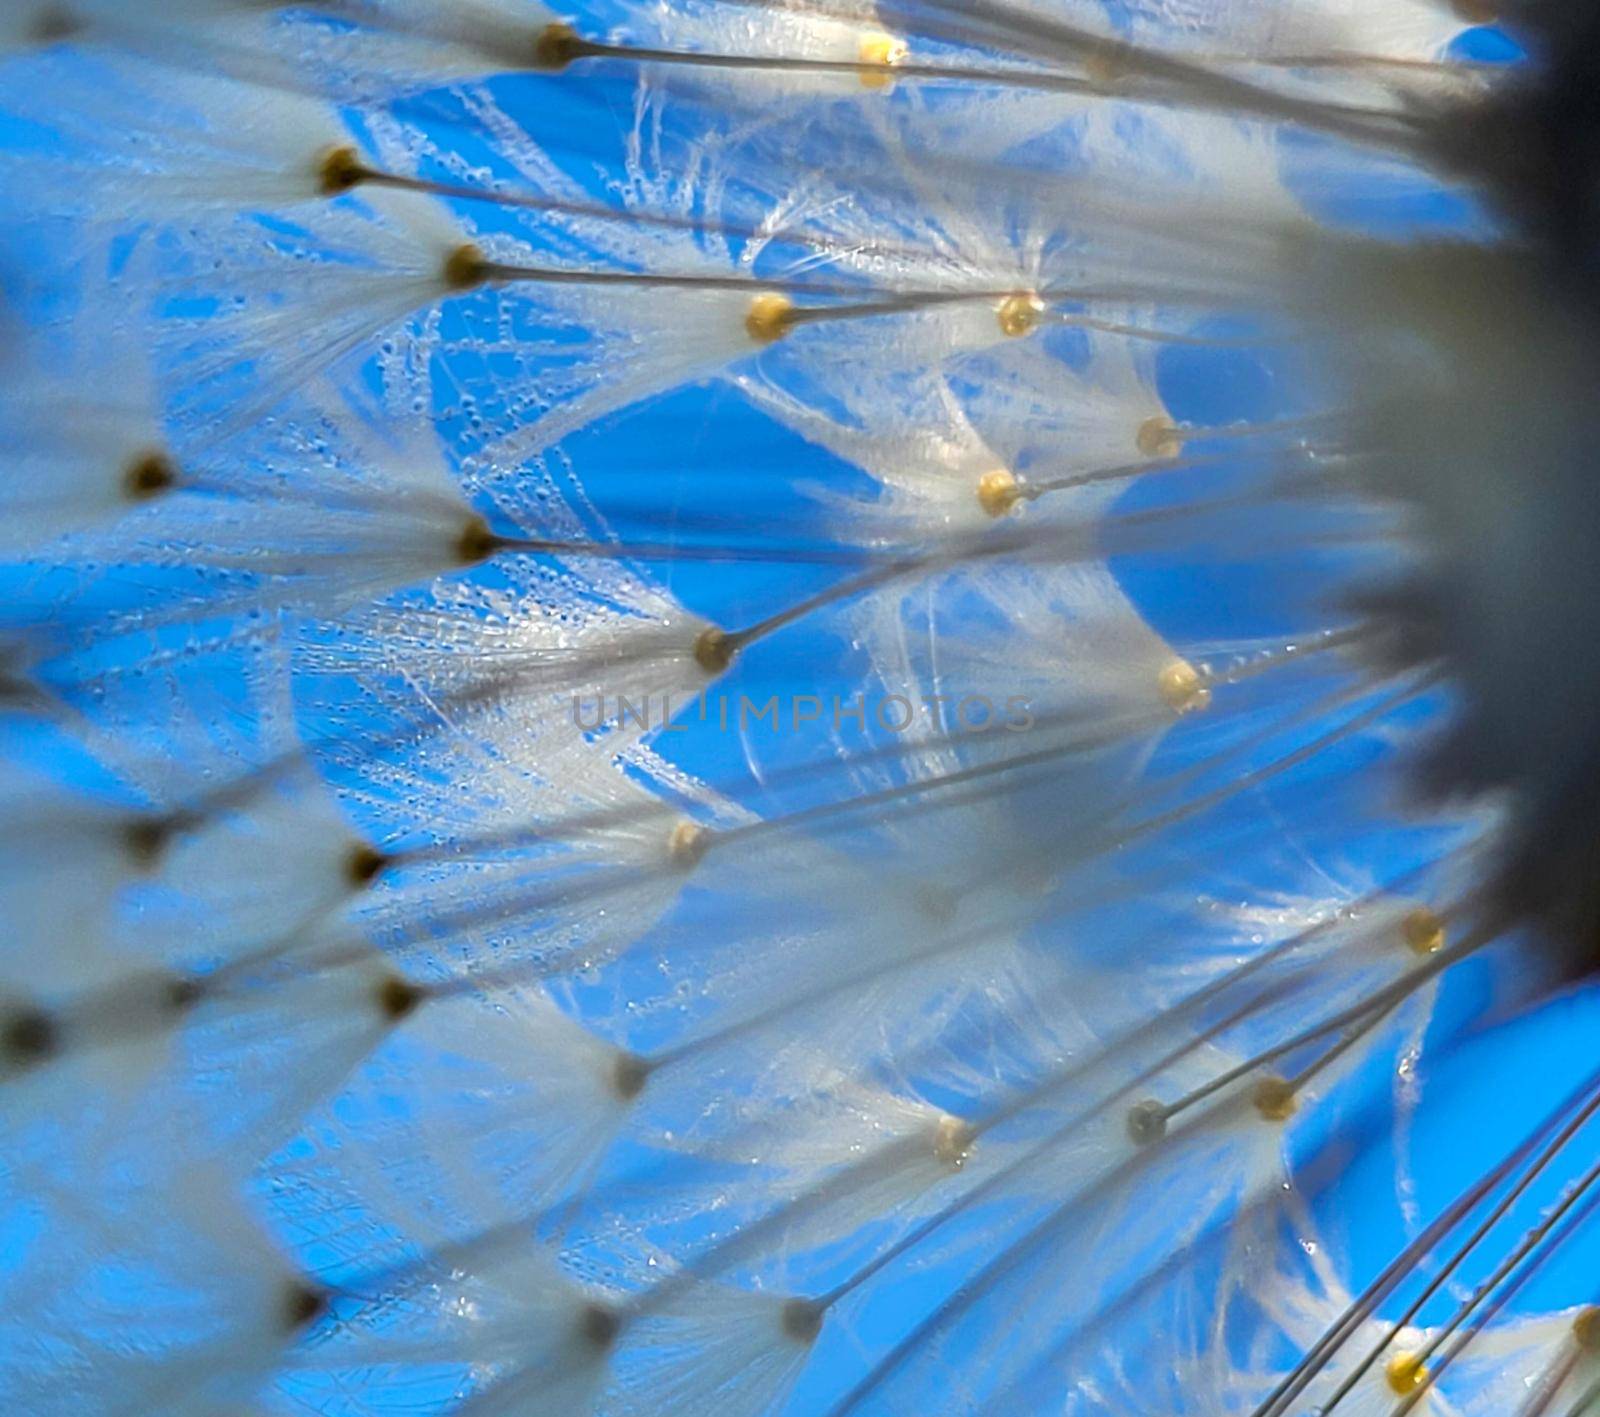 Fluffy dandelion umbrellas in close-up on a blue sky background. Abstraction, background by lapushka62